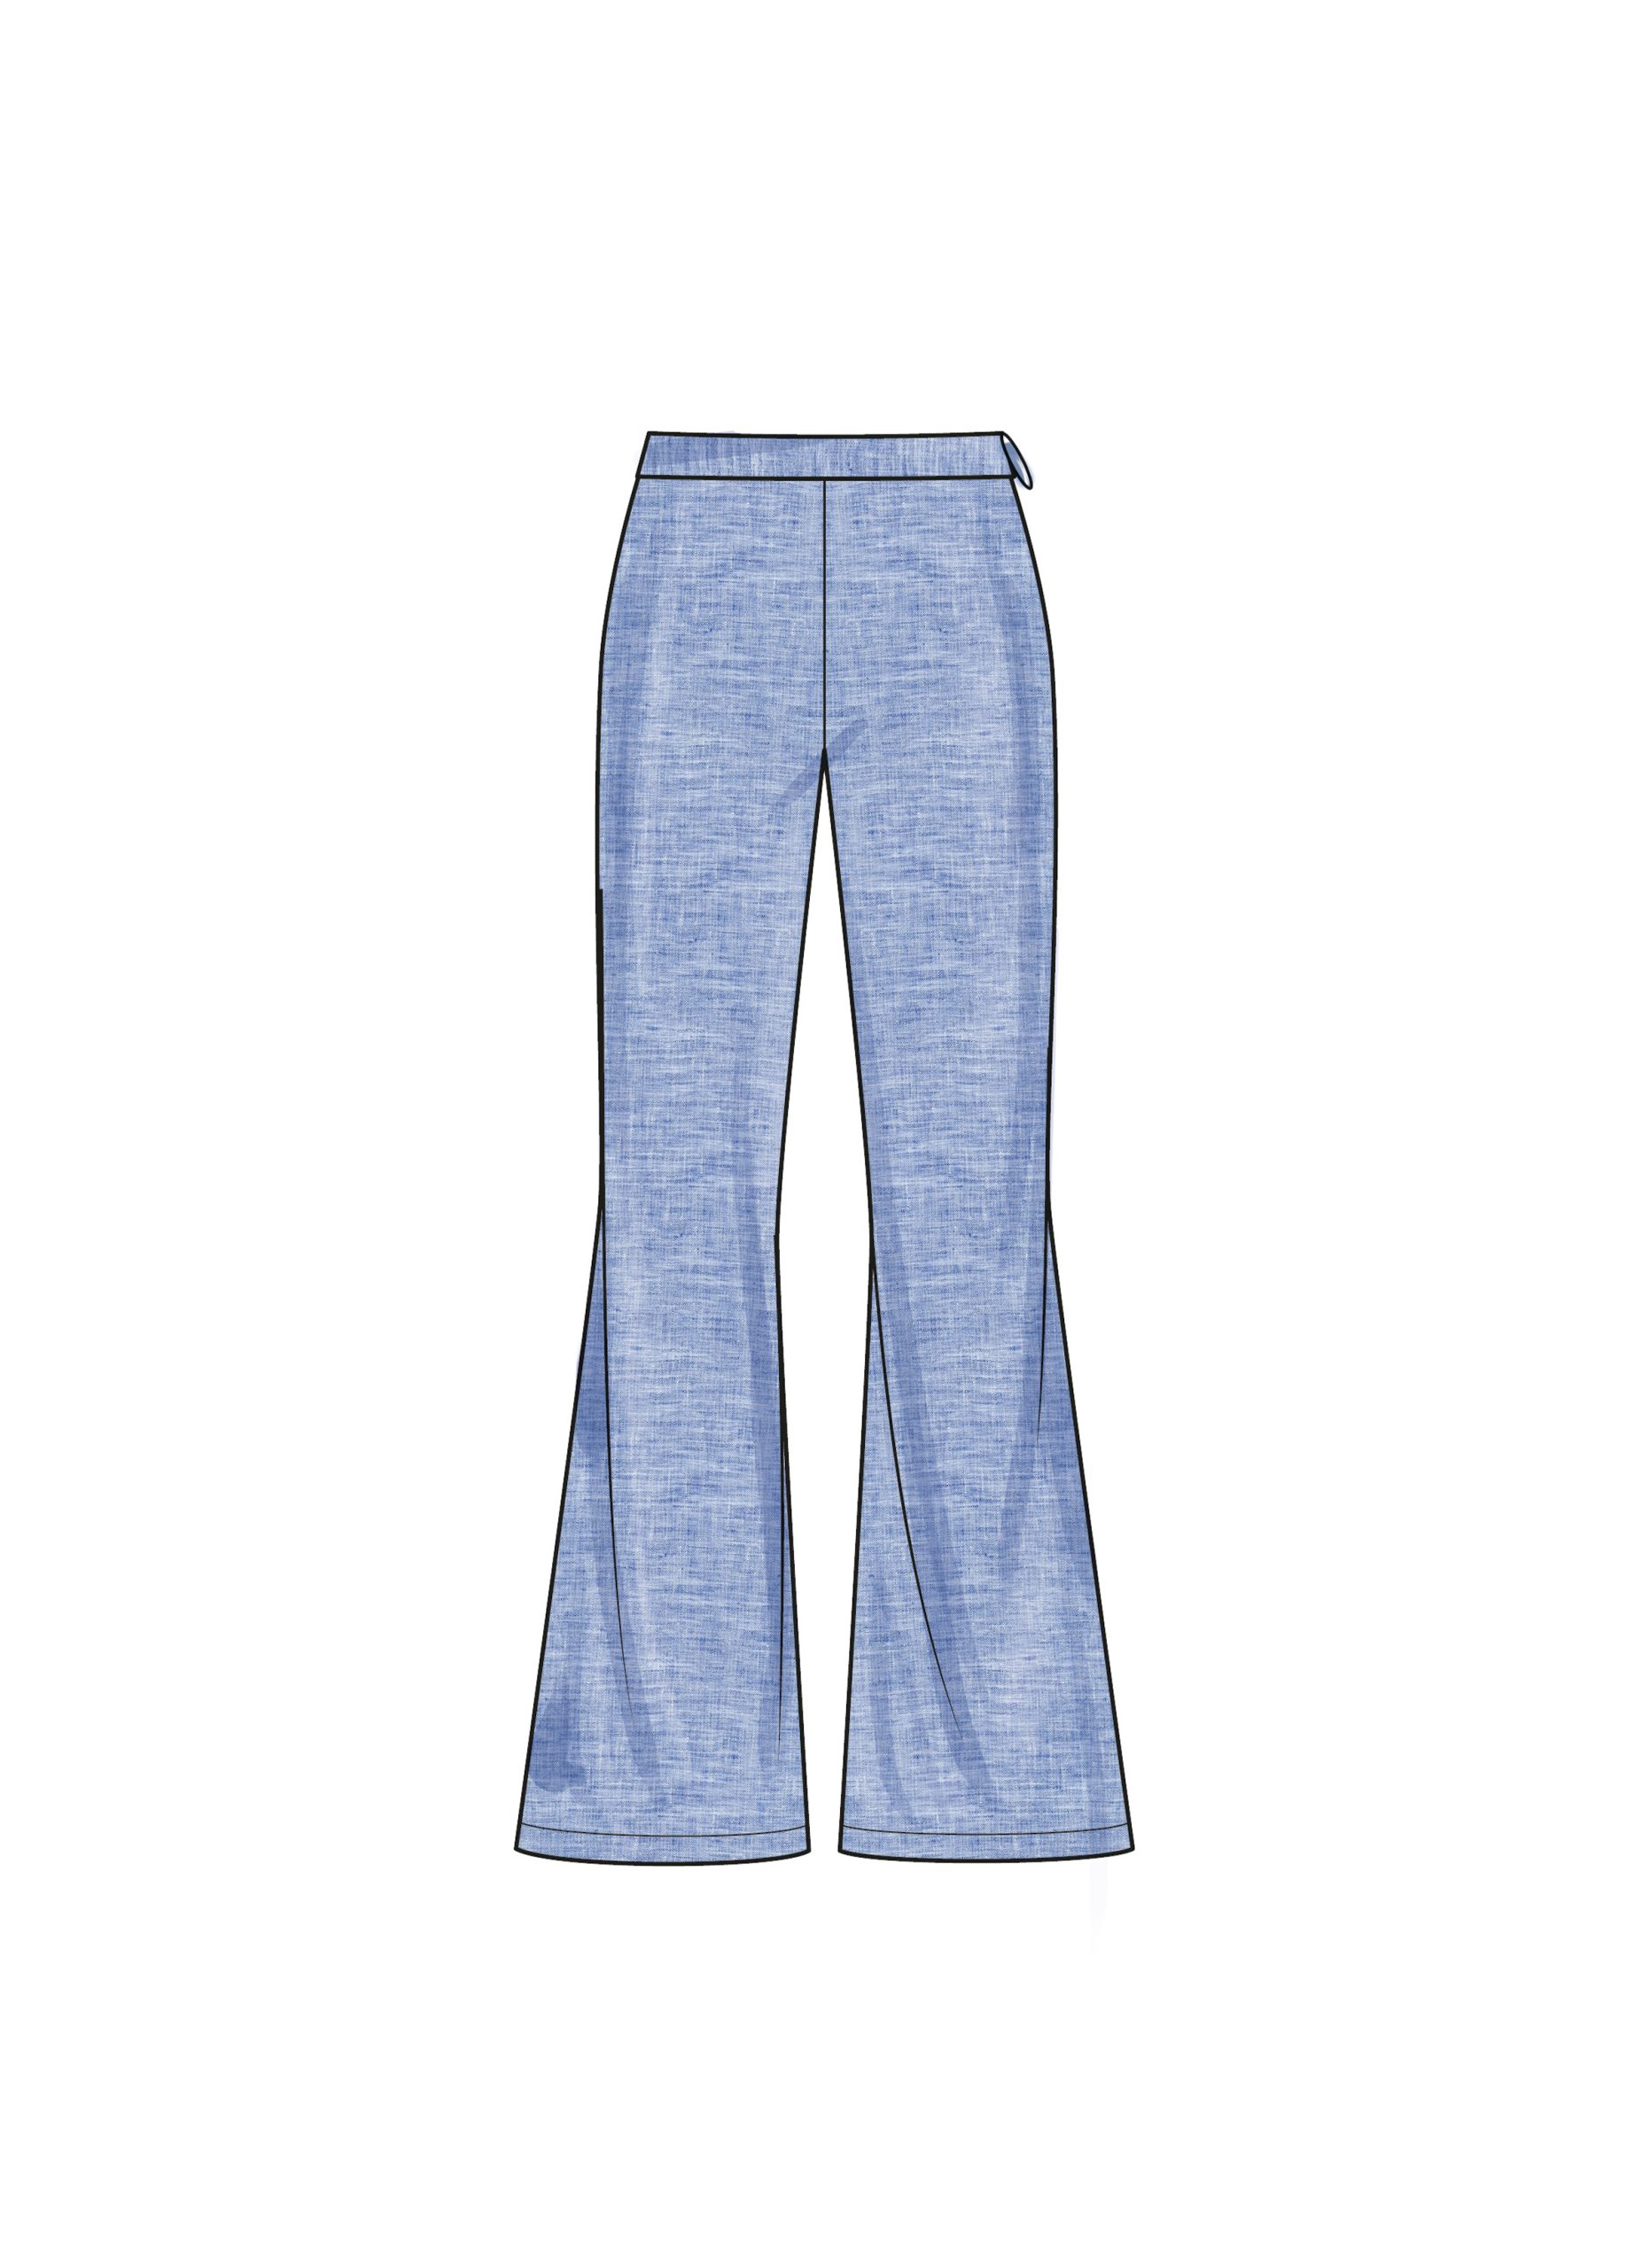 Simplicity Child/Teen Top & Trousers S9863 - The Fold Line